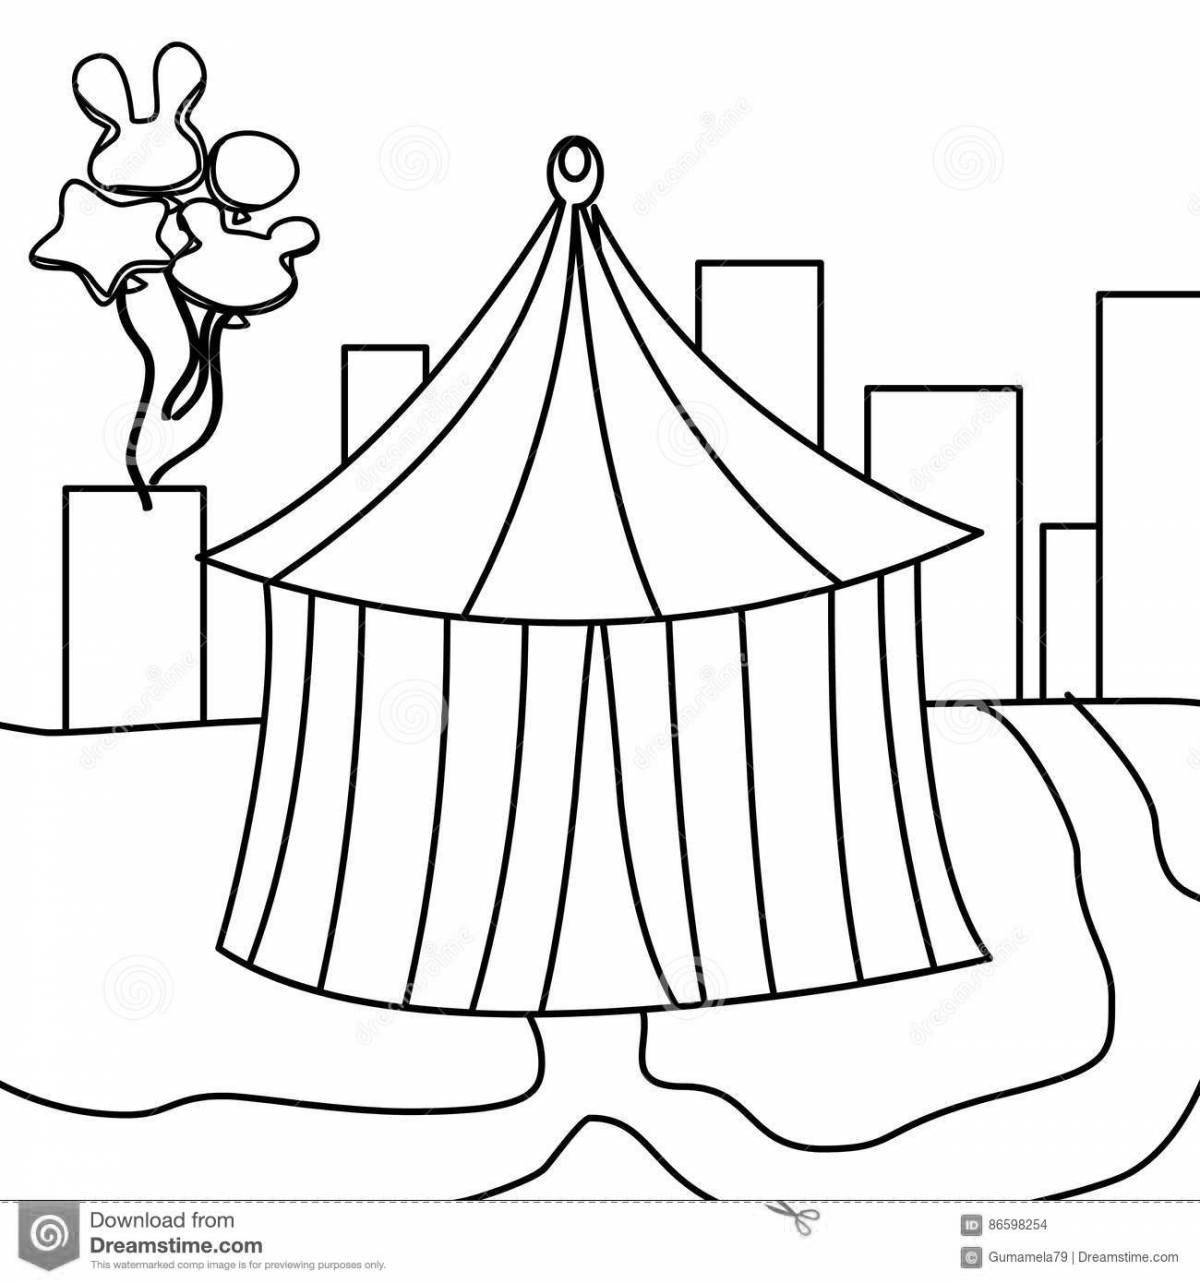 Coloring page playful circus tent